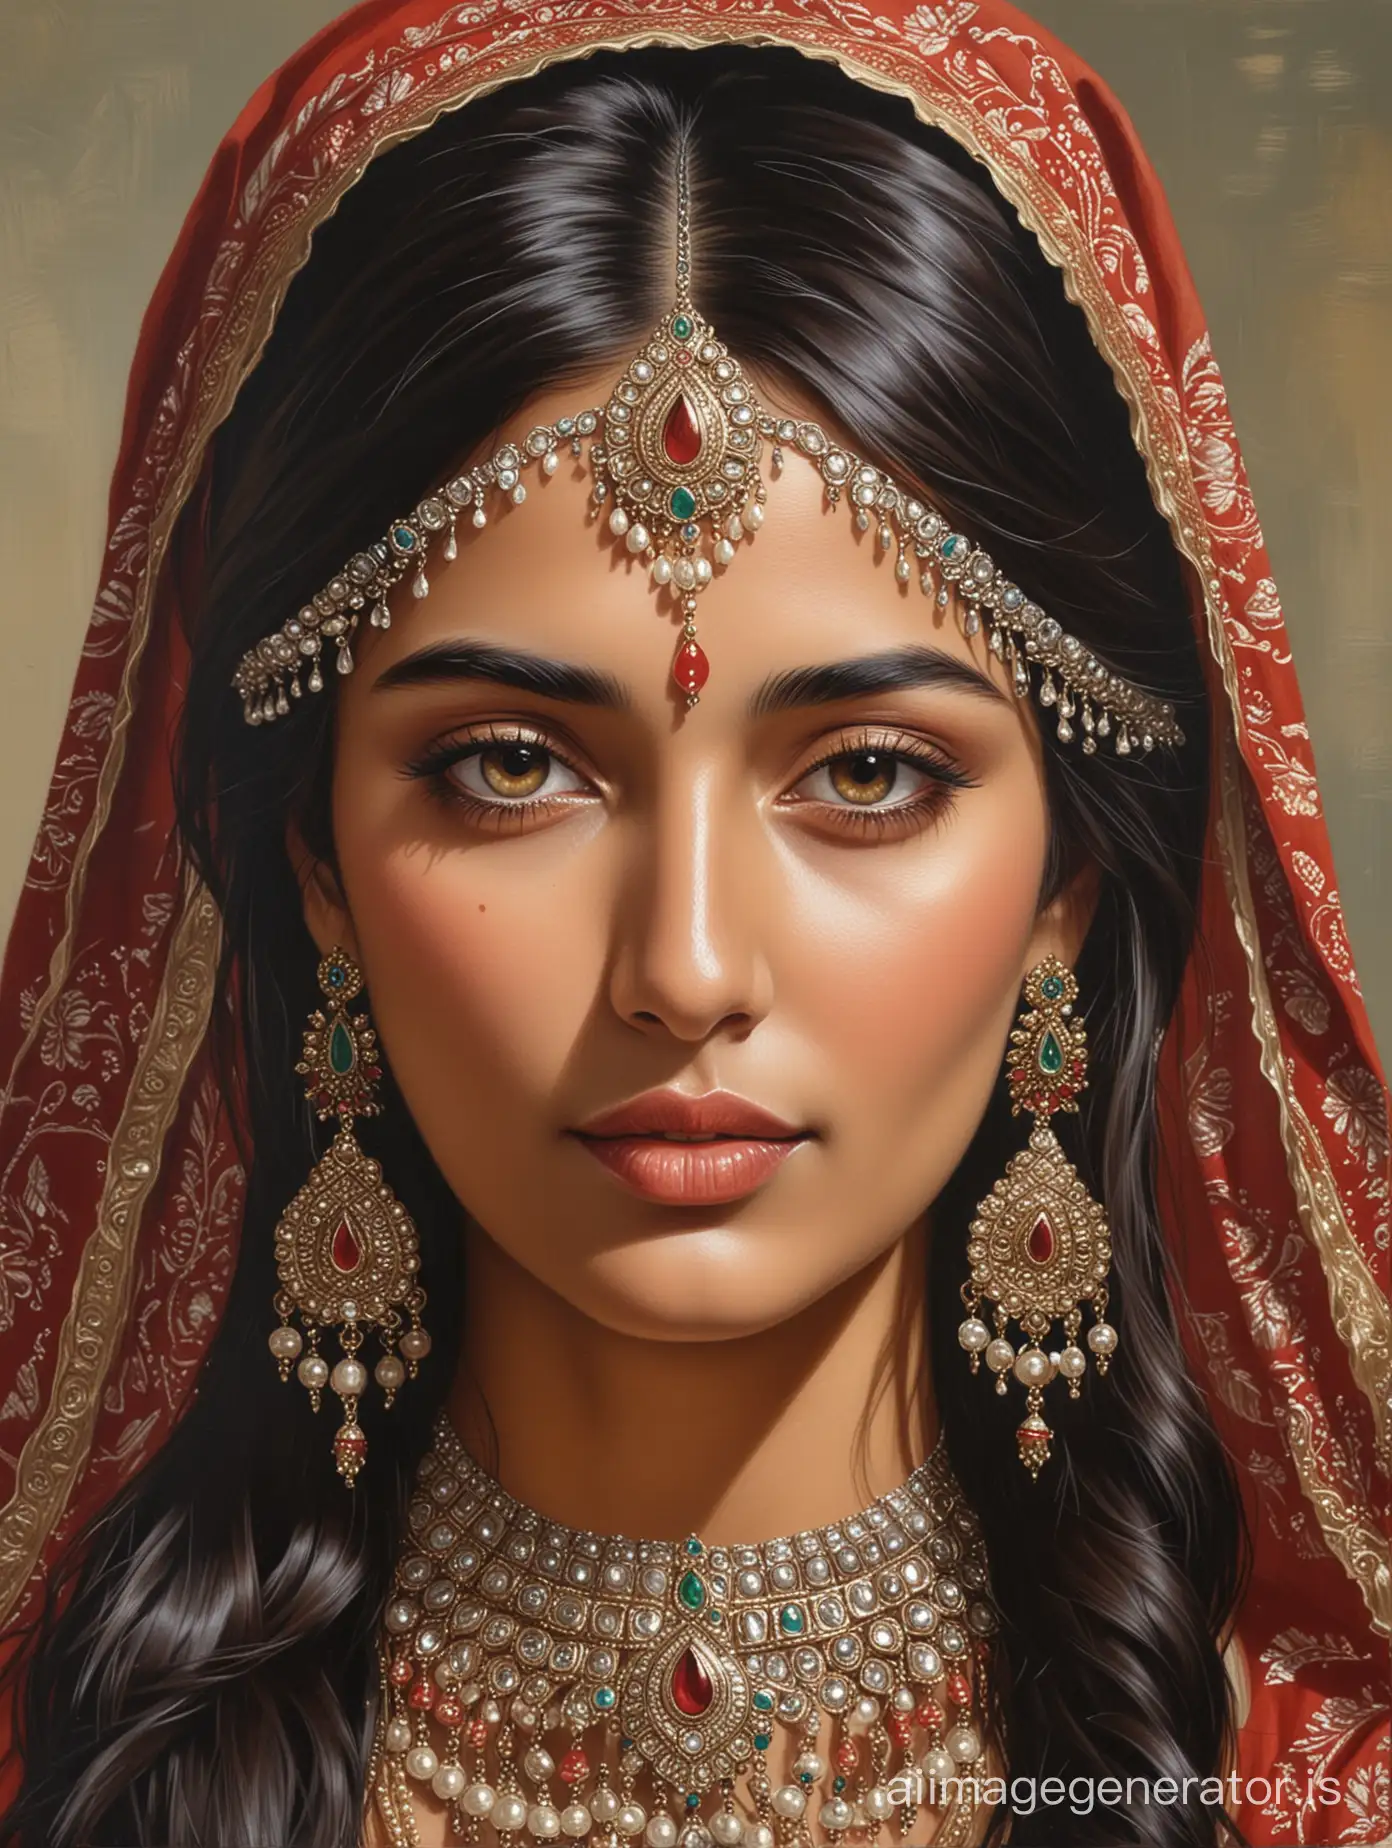 Cole detailed front view oil painting of an Indian beauty with Kundan jewelry